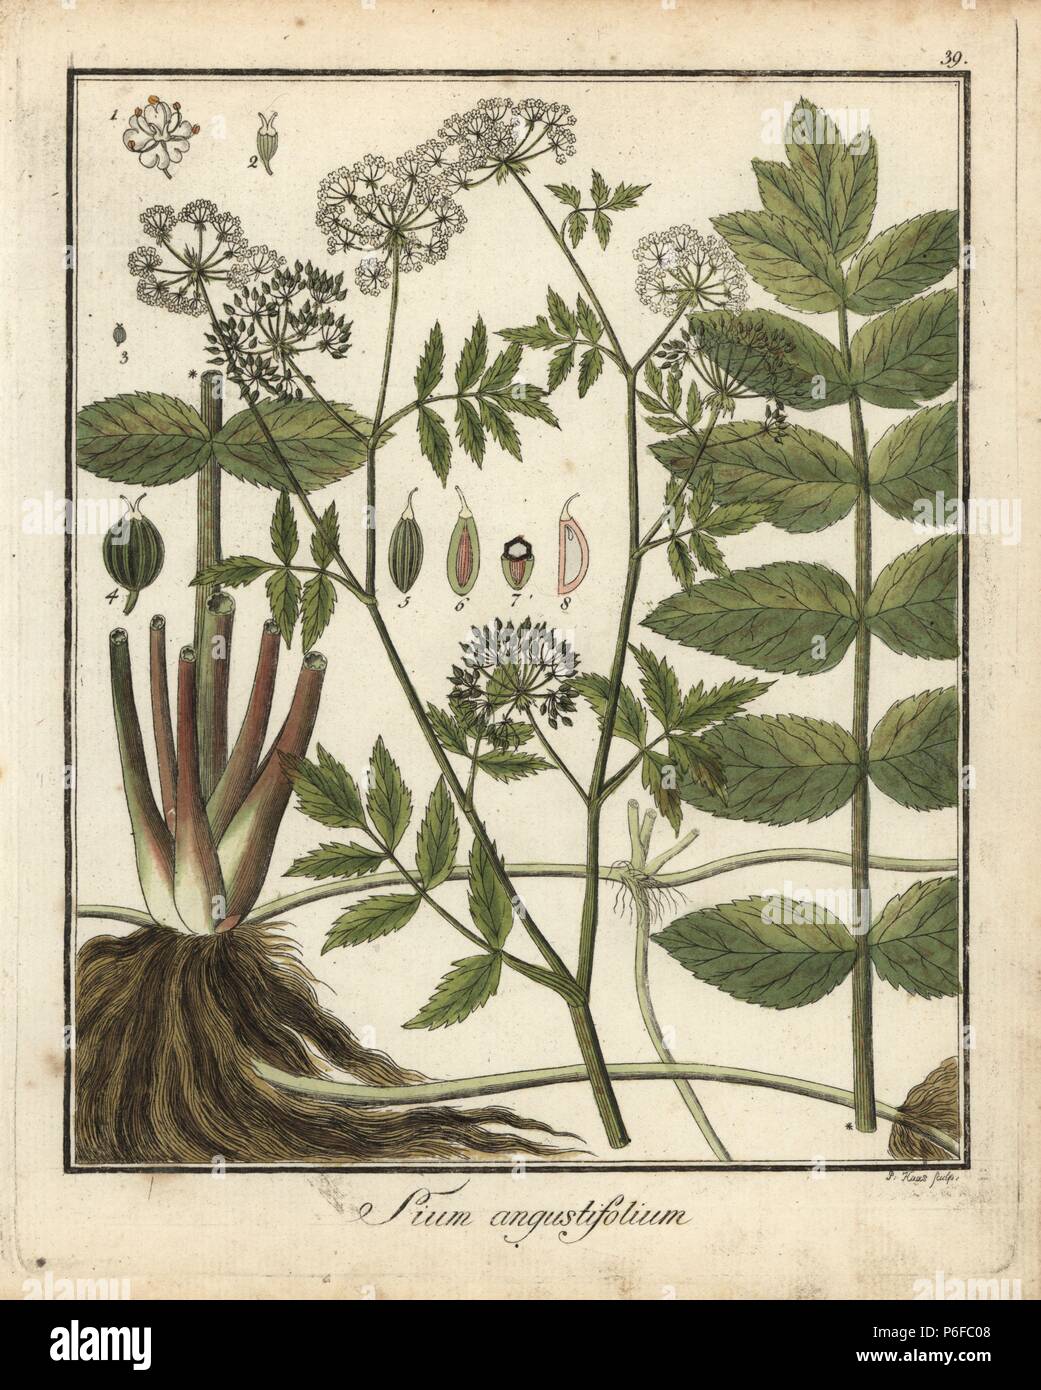 Cutleaf water parsnip, Berula erecta. Handcoloured copperplate engraving by P. Haas from Dr. Friedrich Gottlob Hayne's Medical Botany, Berlin, 1822. Hayne (1763-1832) was a German botanist, apothecary and professor of pharmaceutical botany at Berlin University. Stock Photo